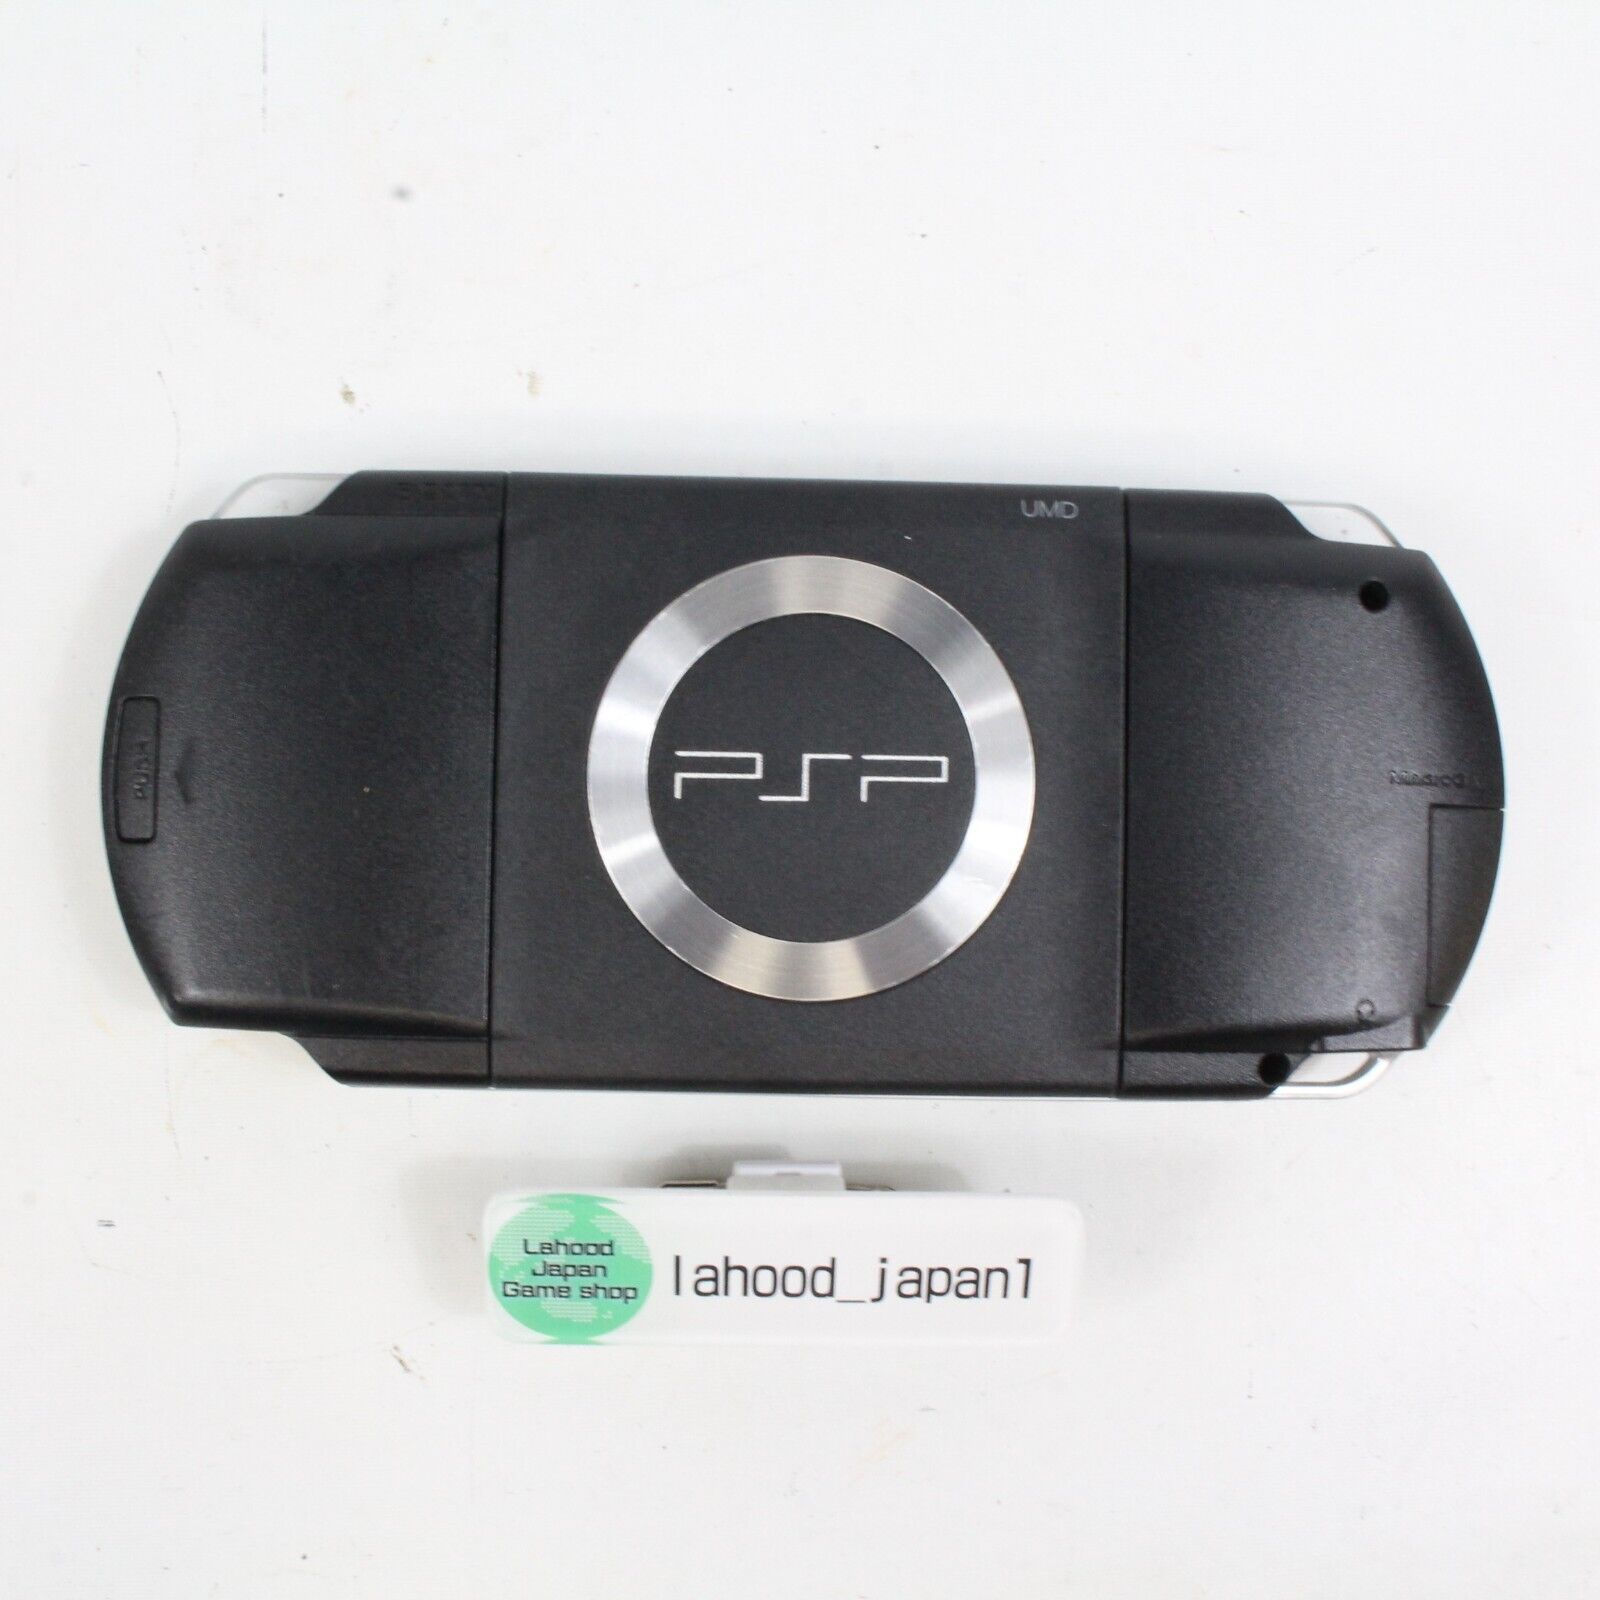 Sony Playstation PSP PSP-1000K Value pack console black Tested